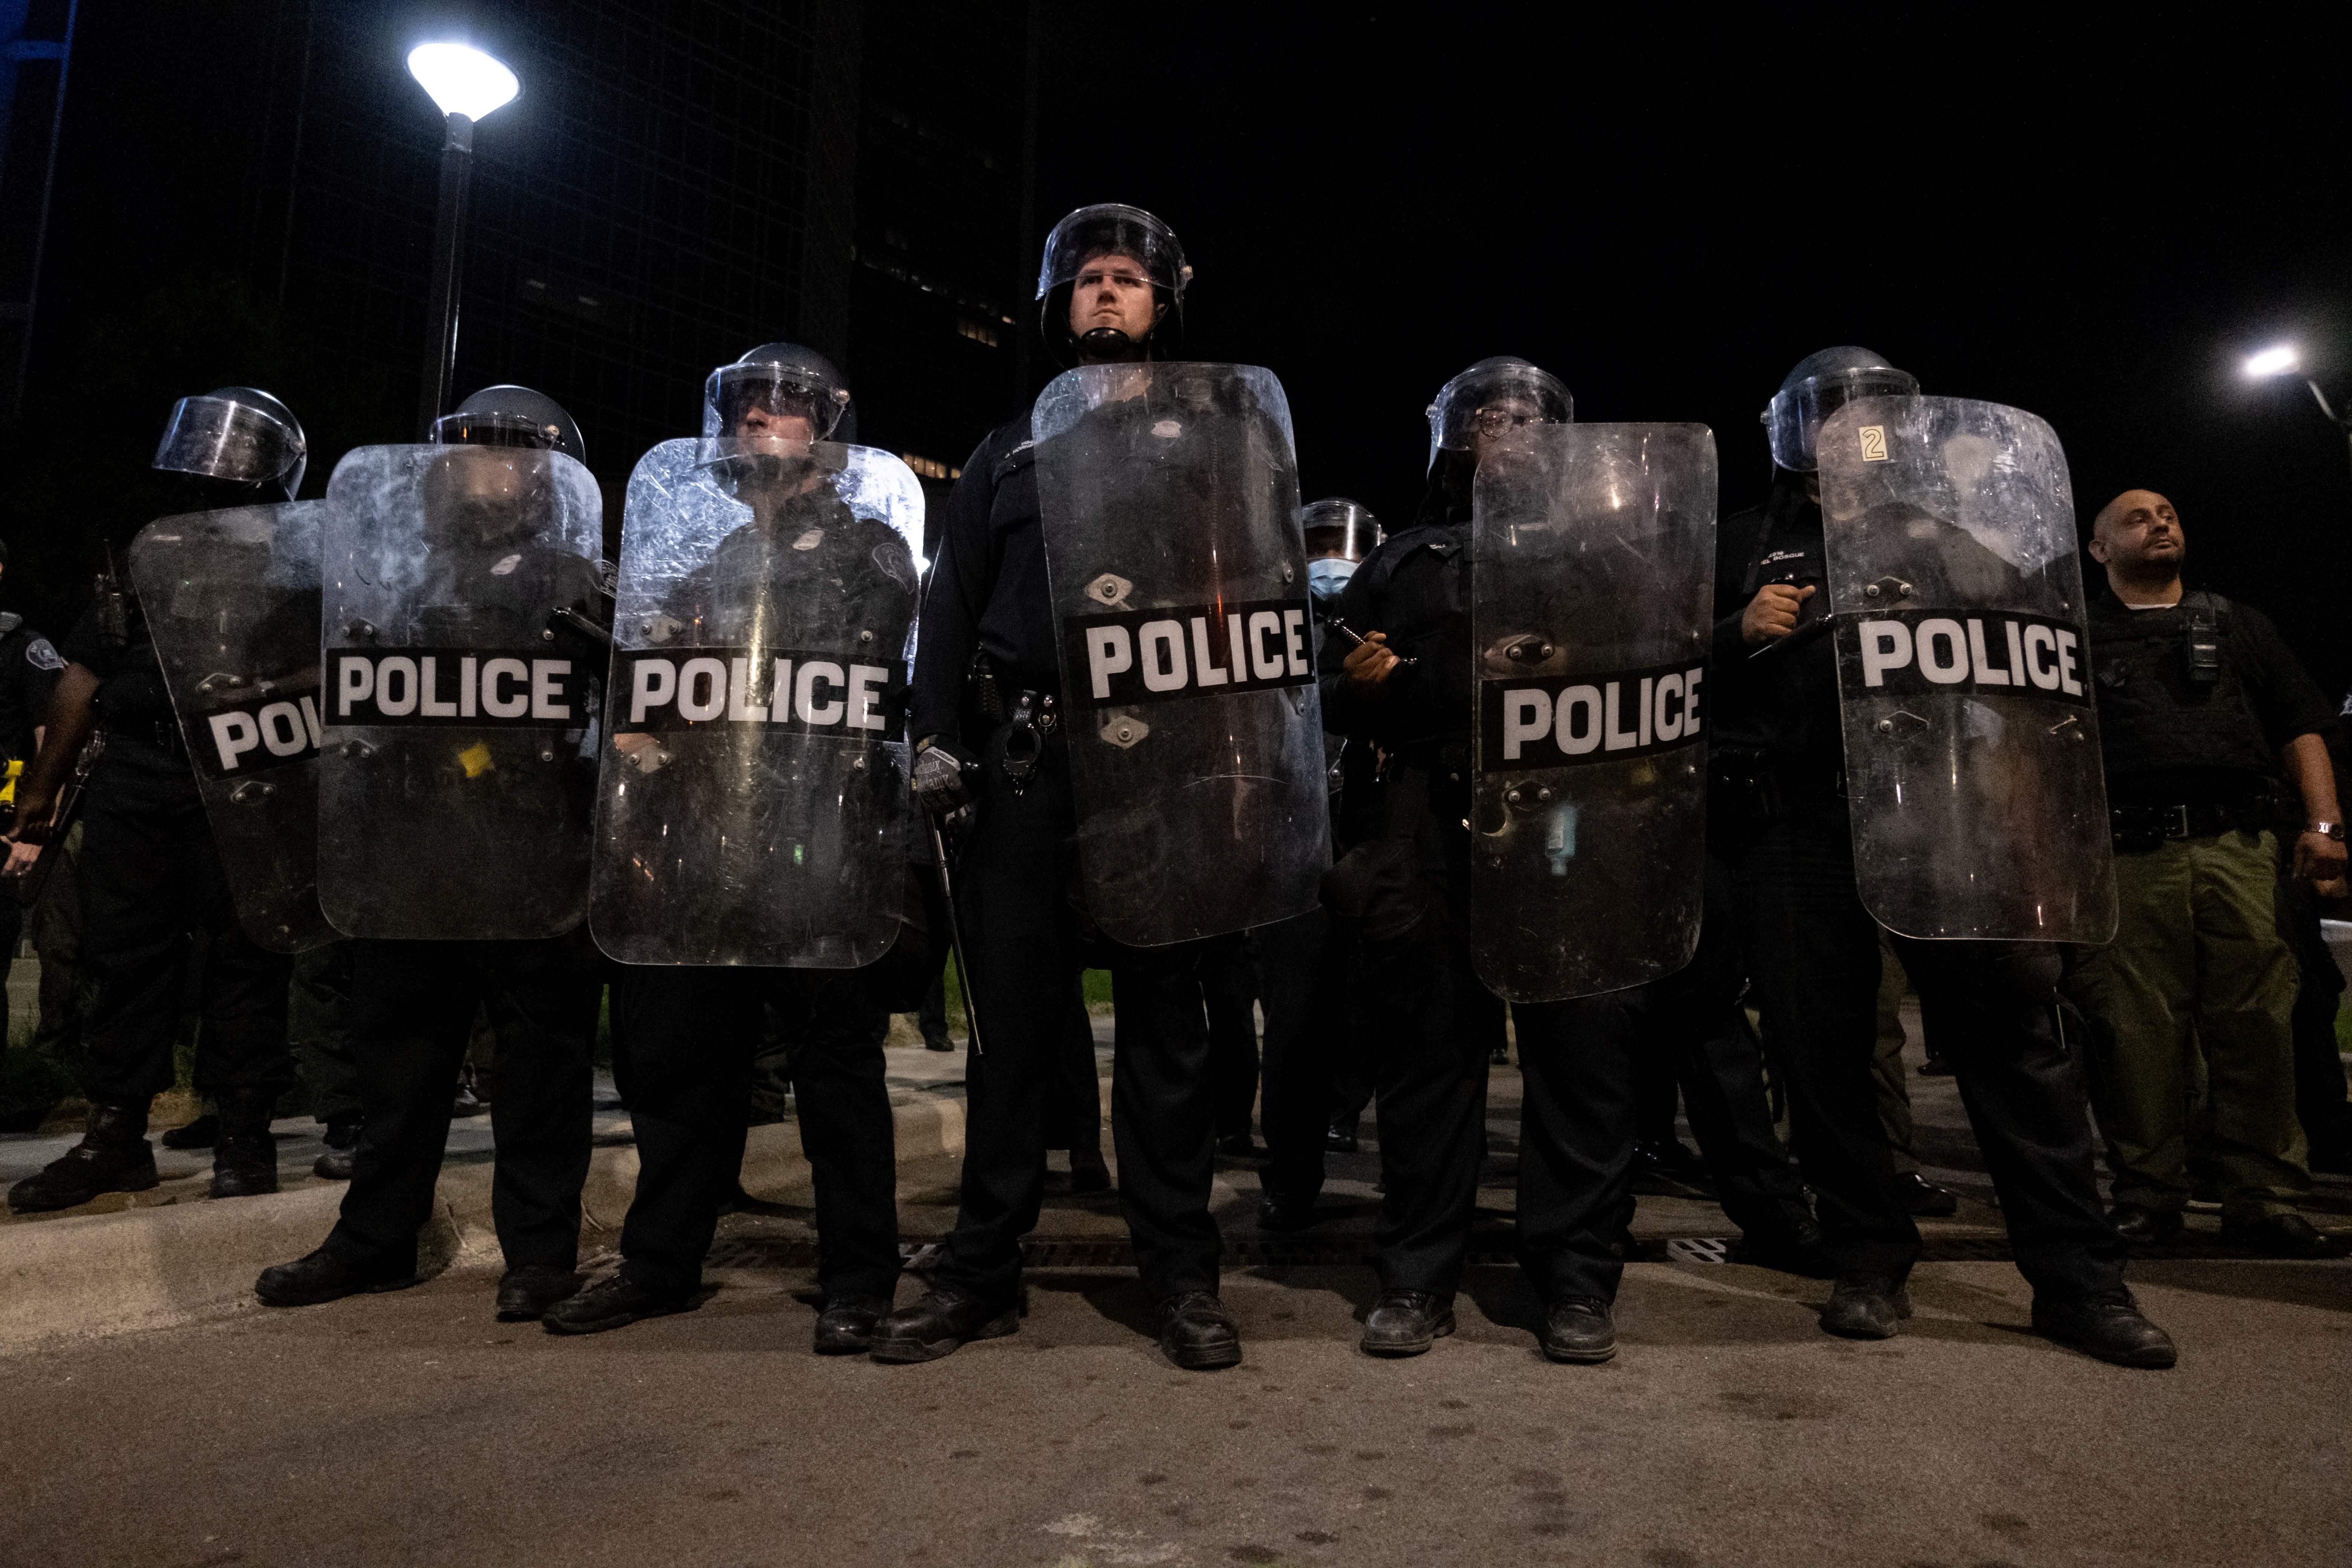 Police officers holding shields.